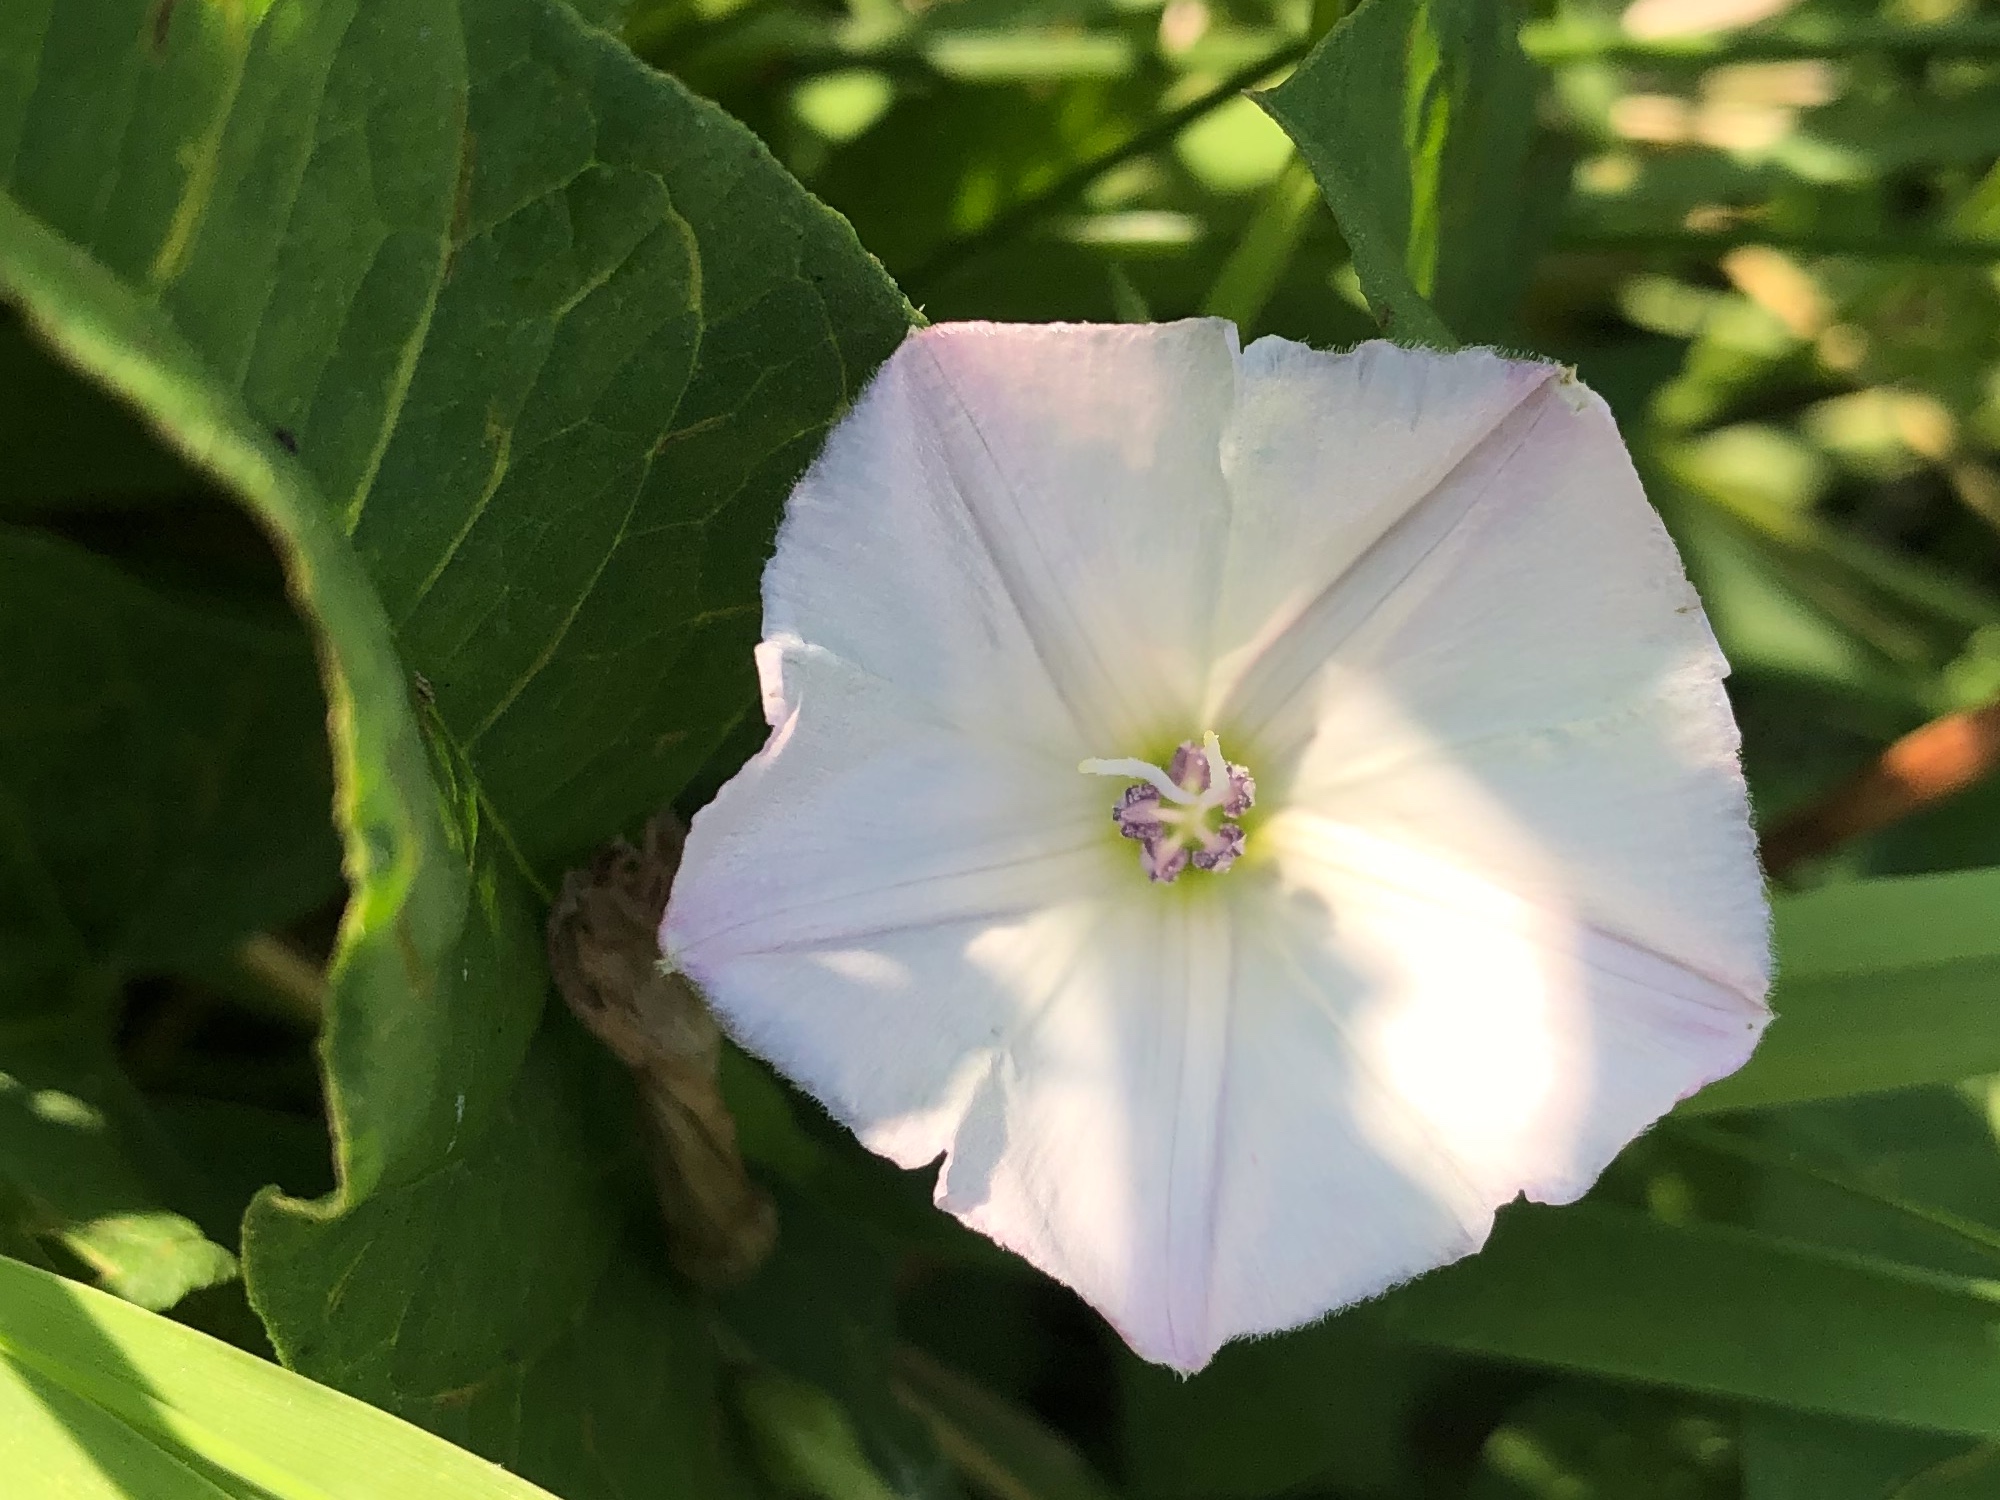 Hedge Bindweed on shore of Marion Dunn Pond in Madison, Wisconsin on June 11, 2021.